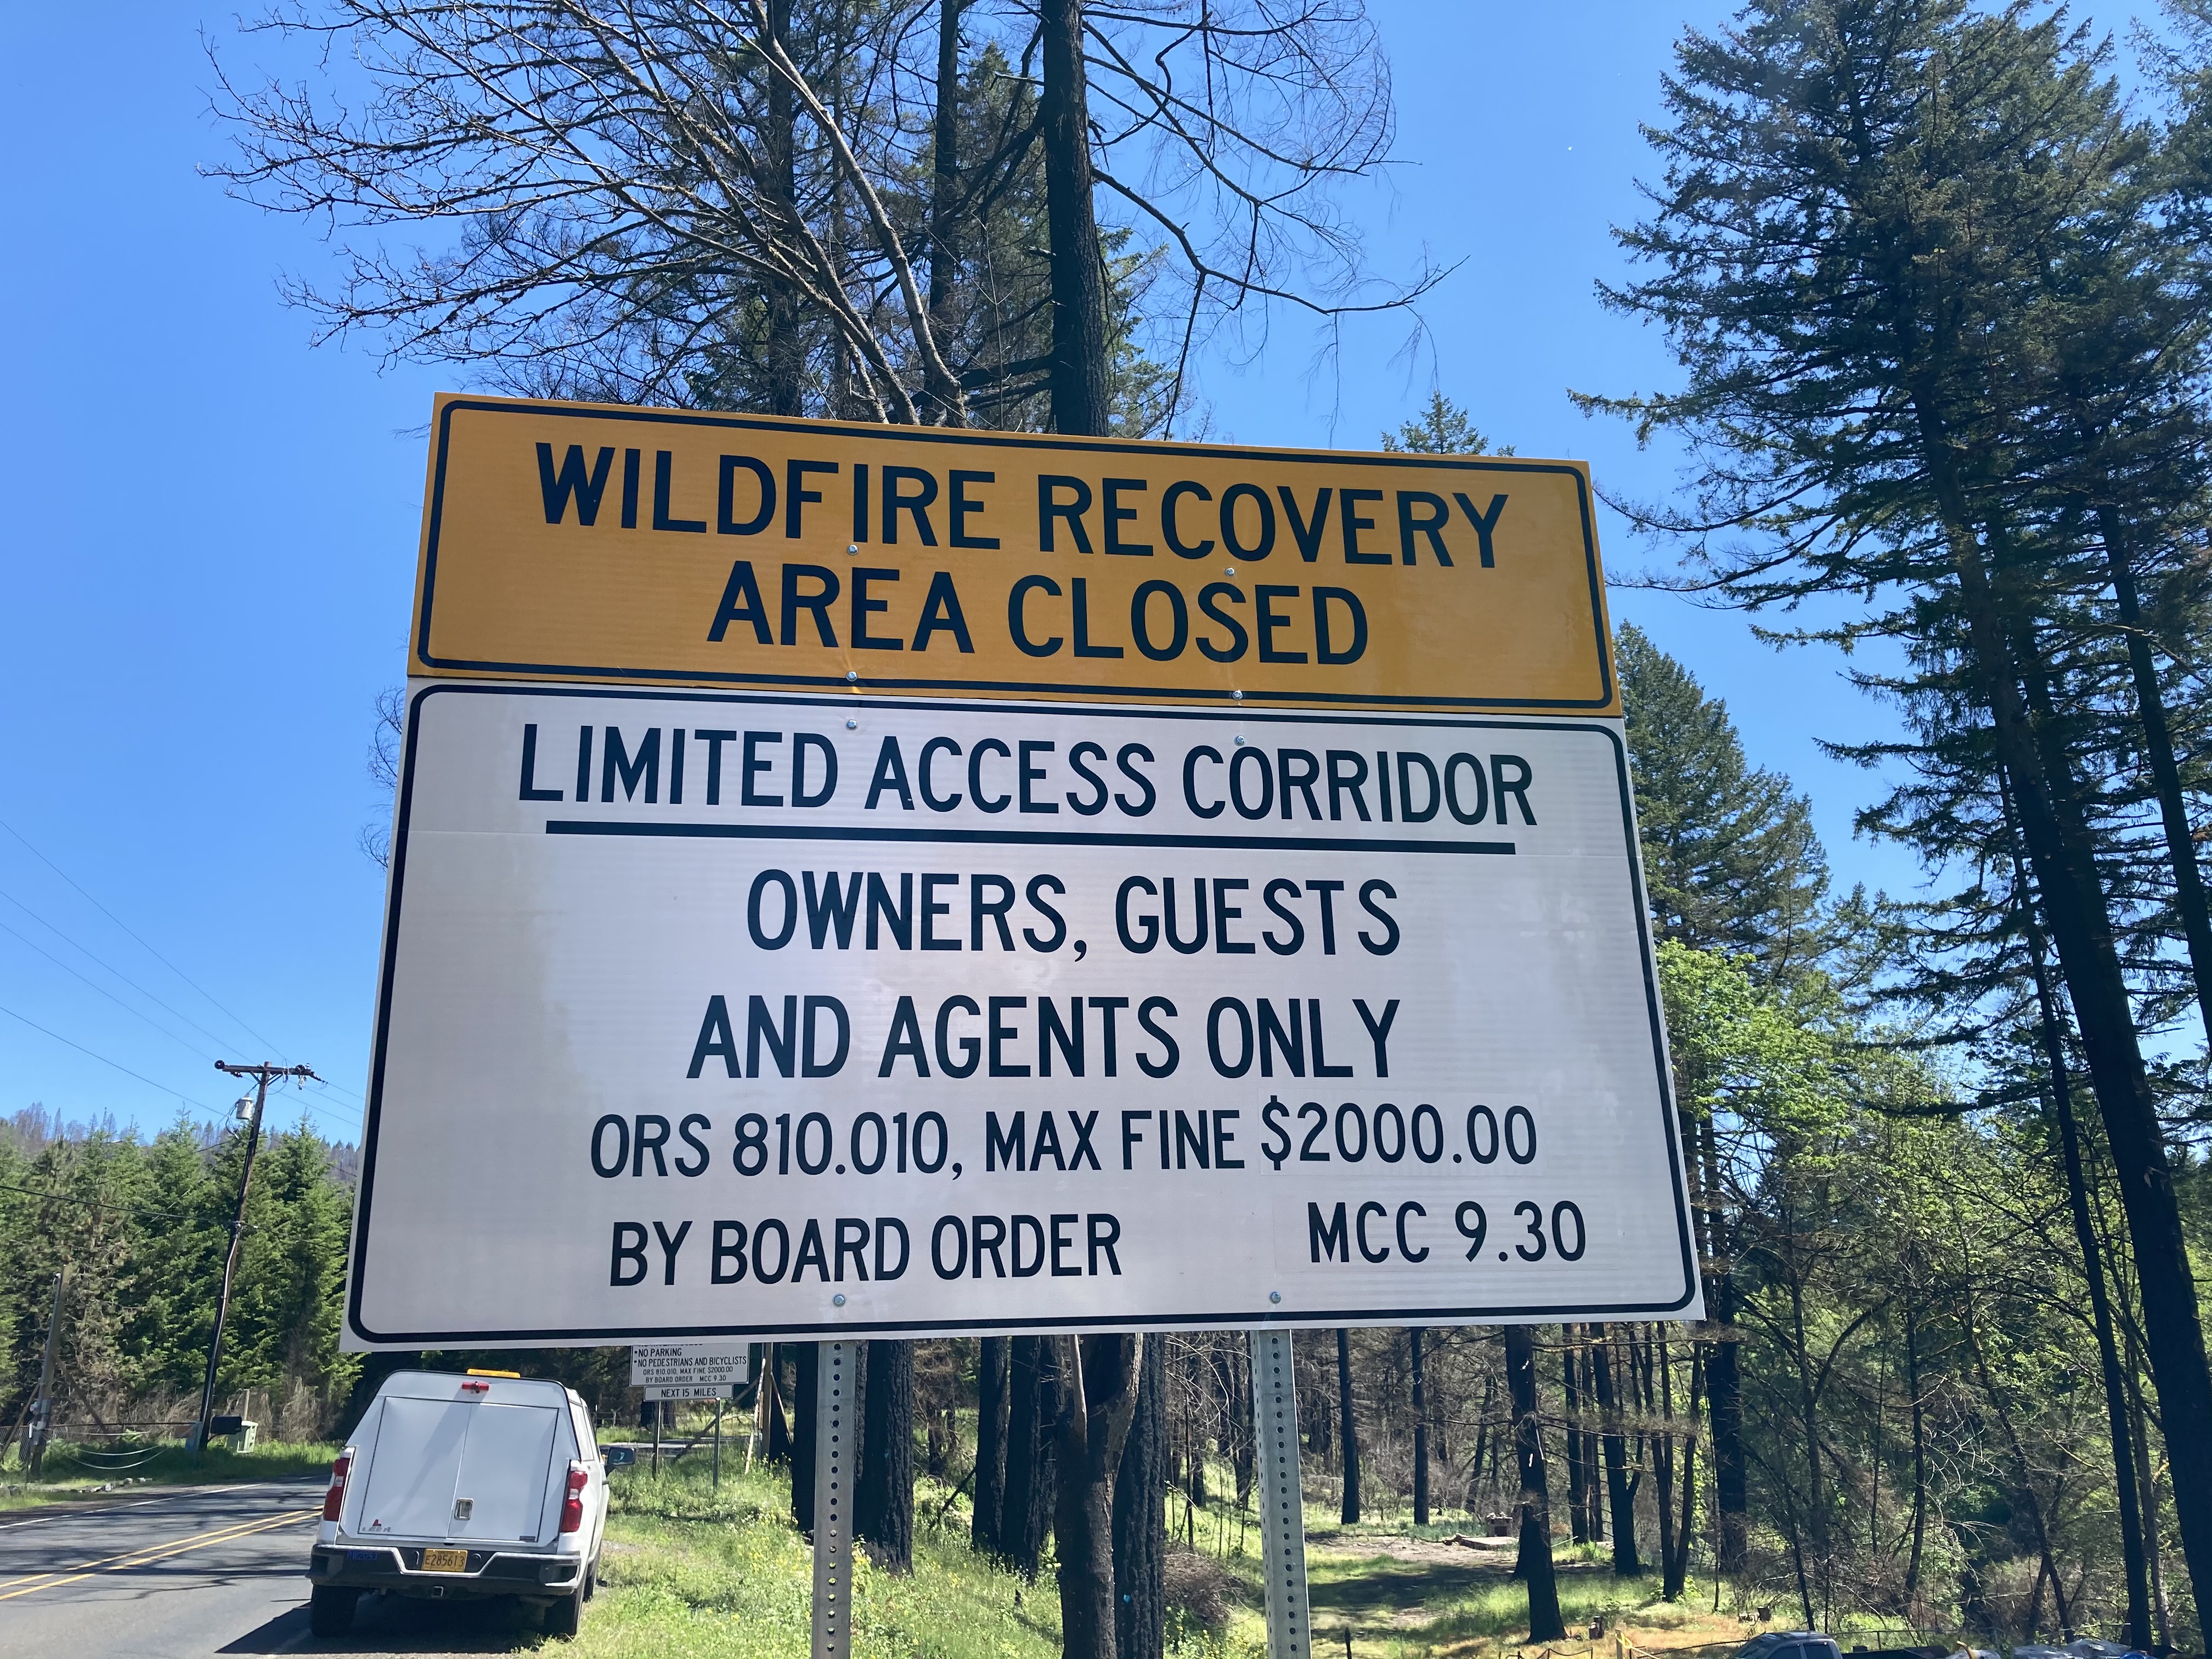 County reminds visitors of Santiam Canyon closures due to wildfire damage